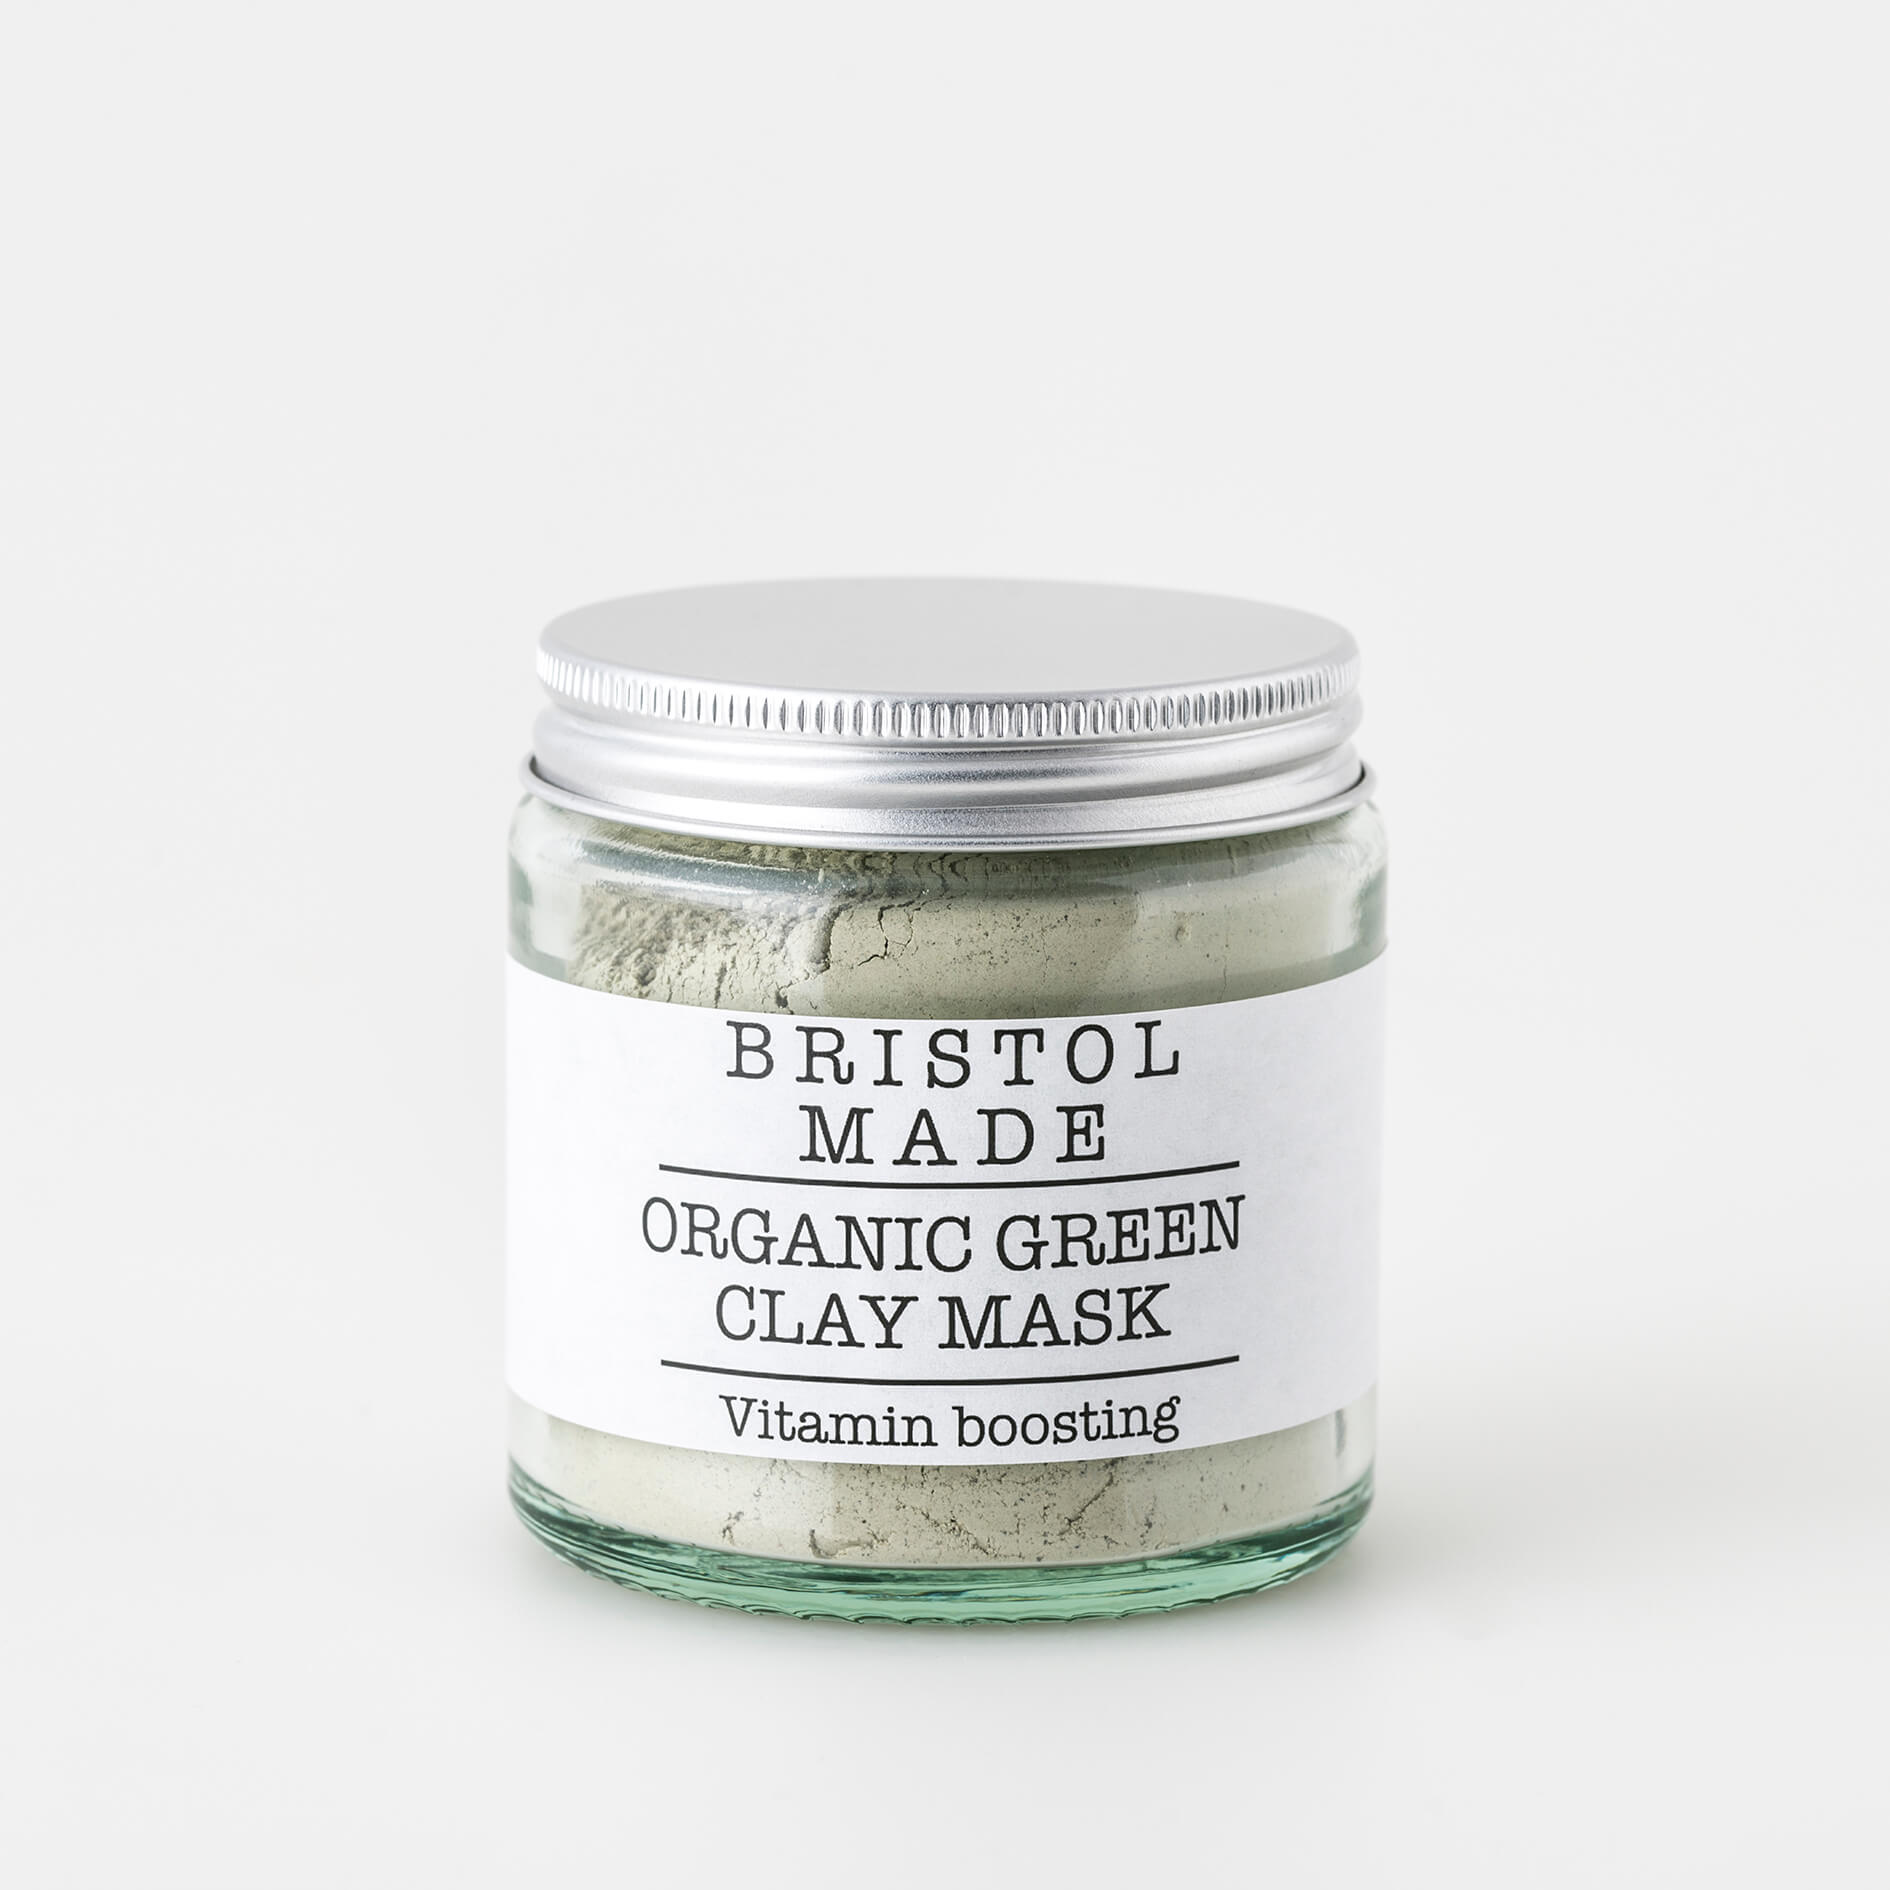 A 120ml jar of Bristolmade Green Clay Mask, featuring a white label with black text, fine green clay, for deep cleansing and detoxifying of the skin. 